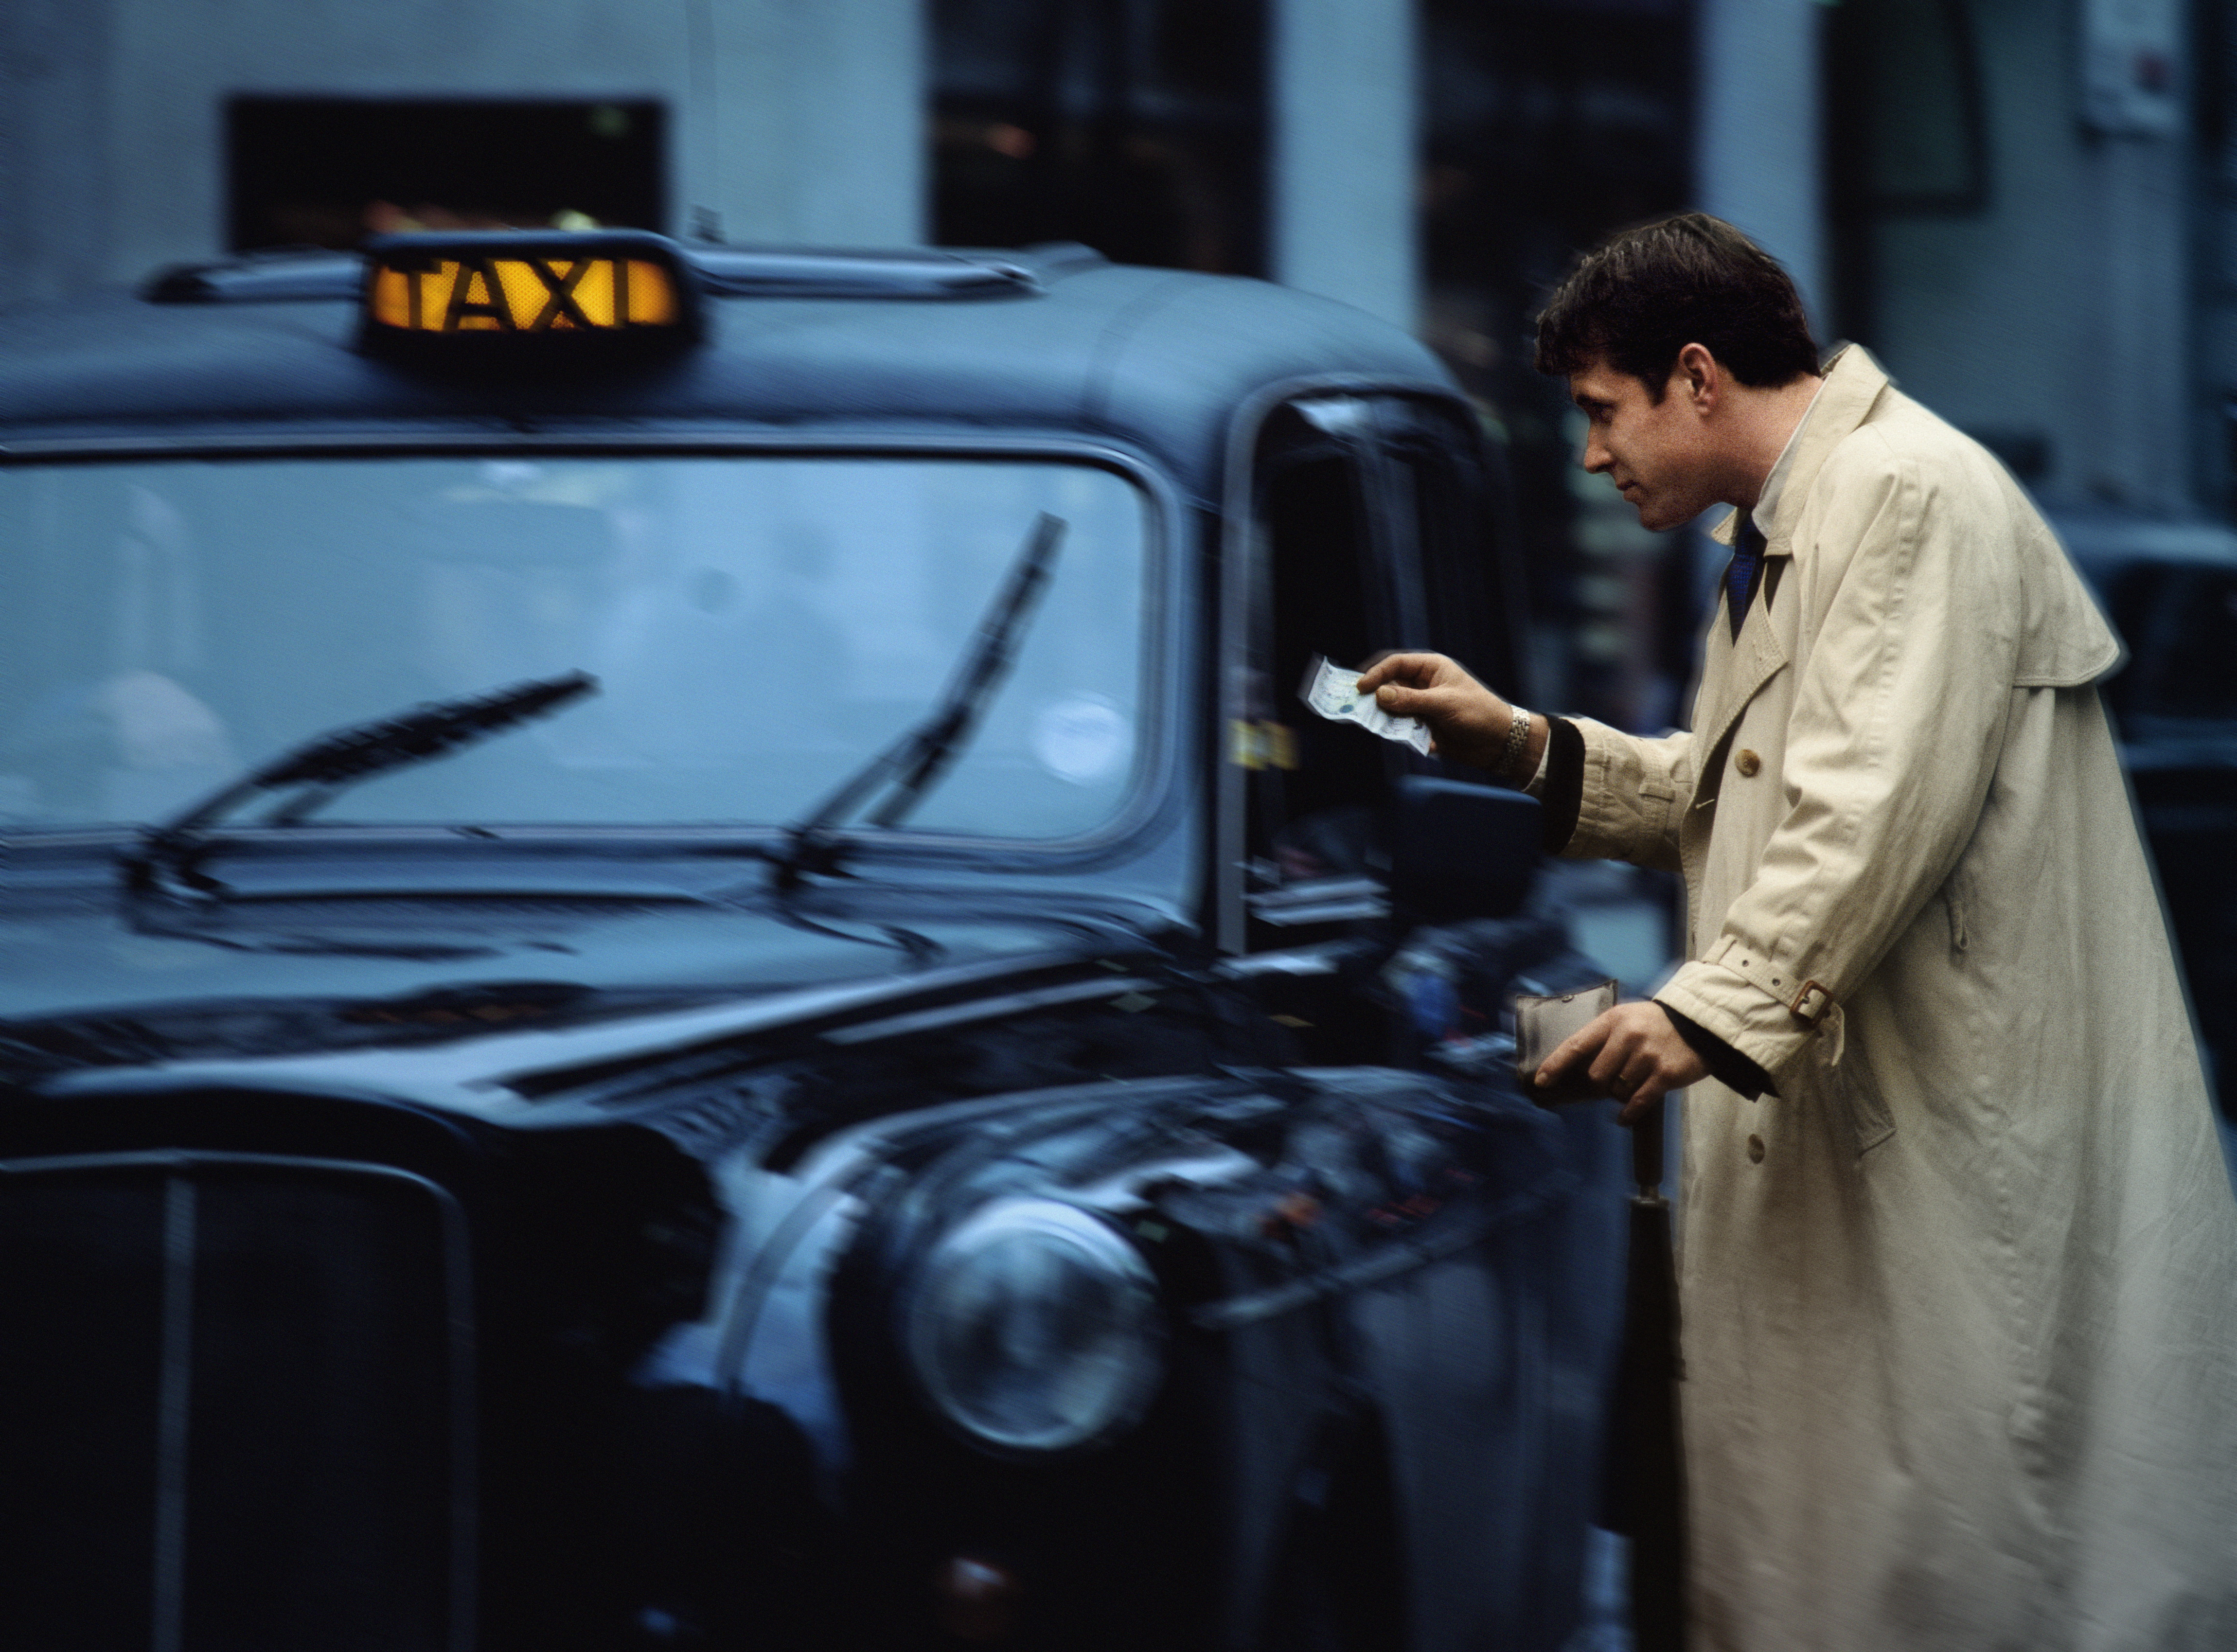 A man catches a taxi | Source: Getty Images